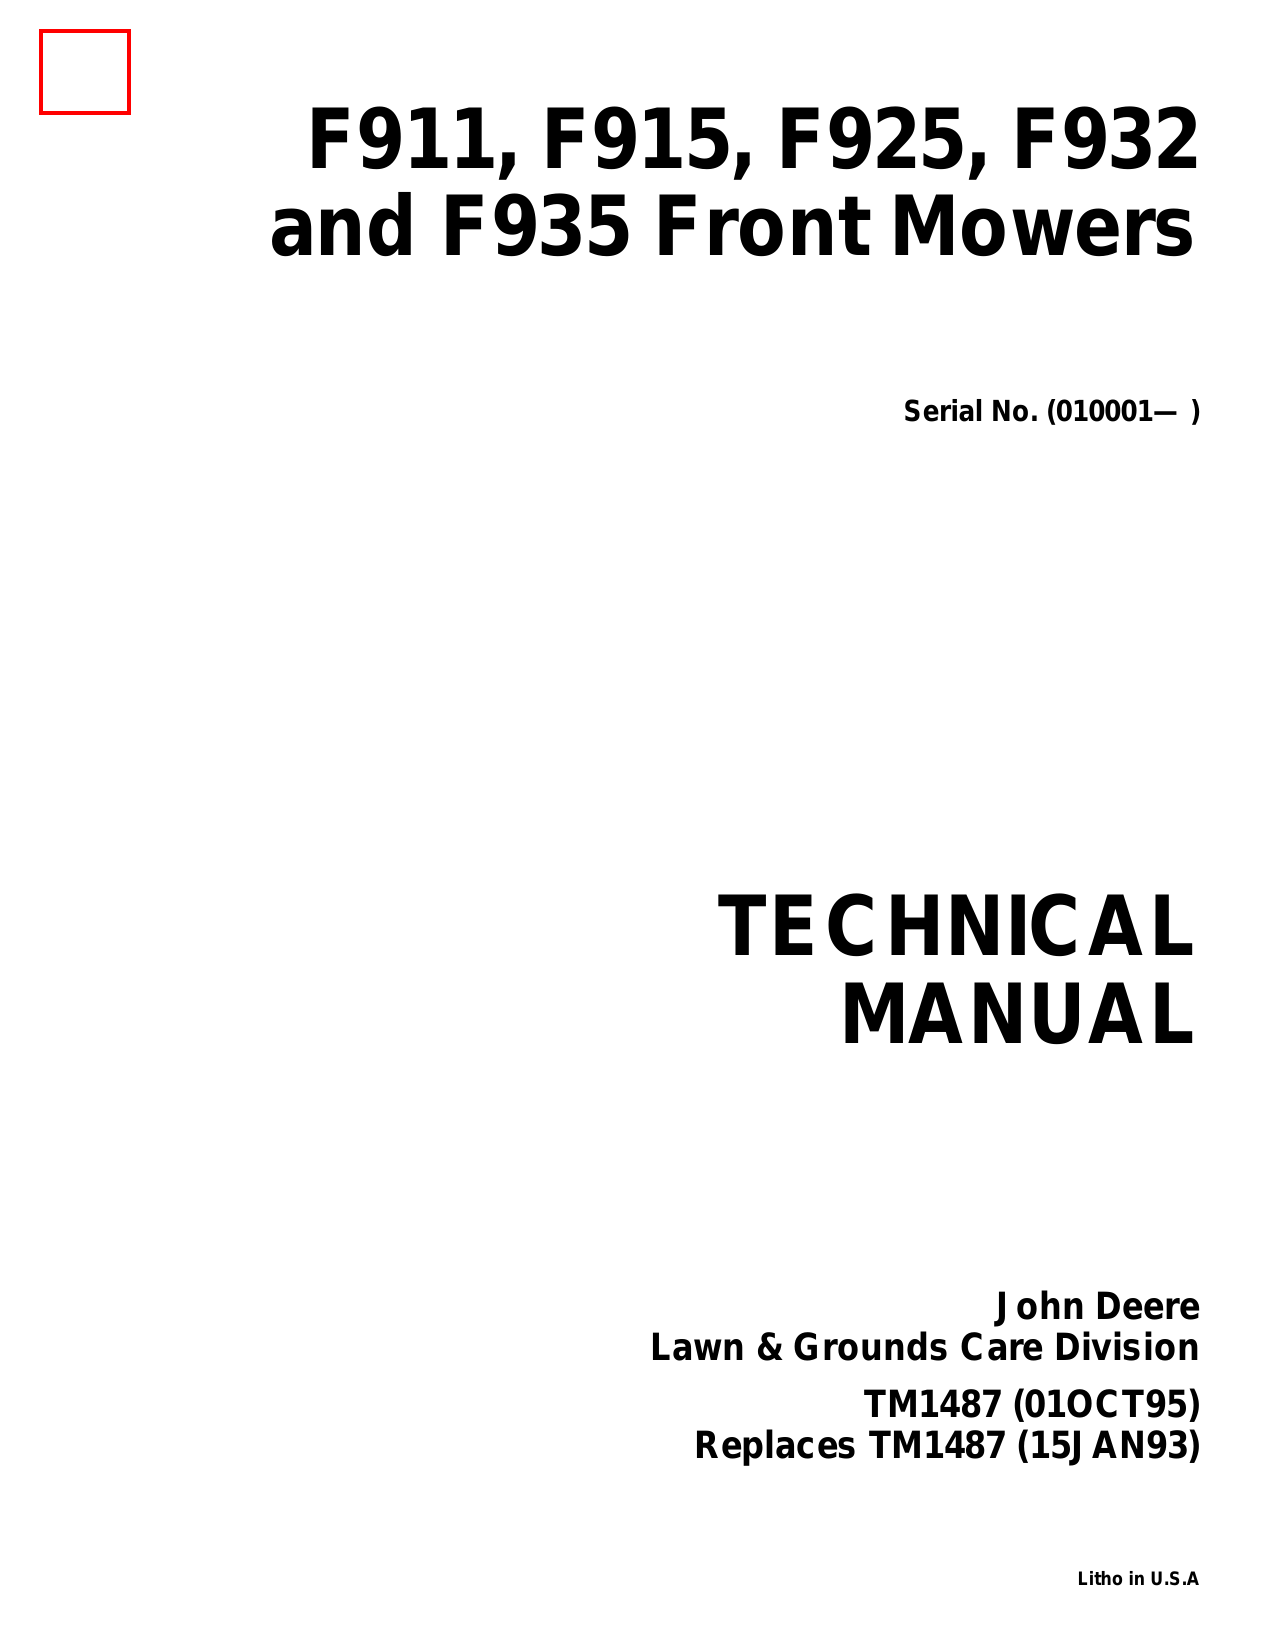 John Deere F911, F915, F925, F932, F935 front mower technical manual Preview image 1